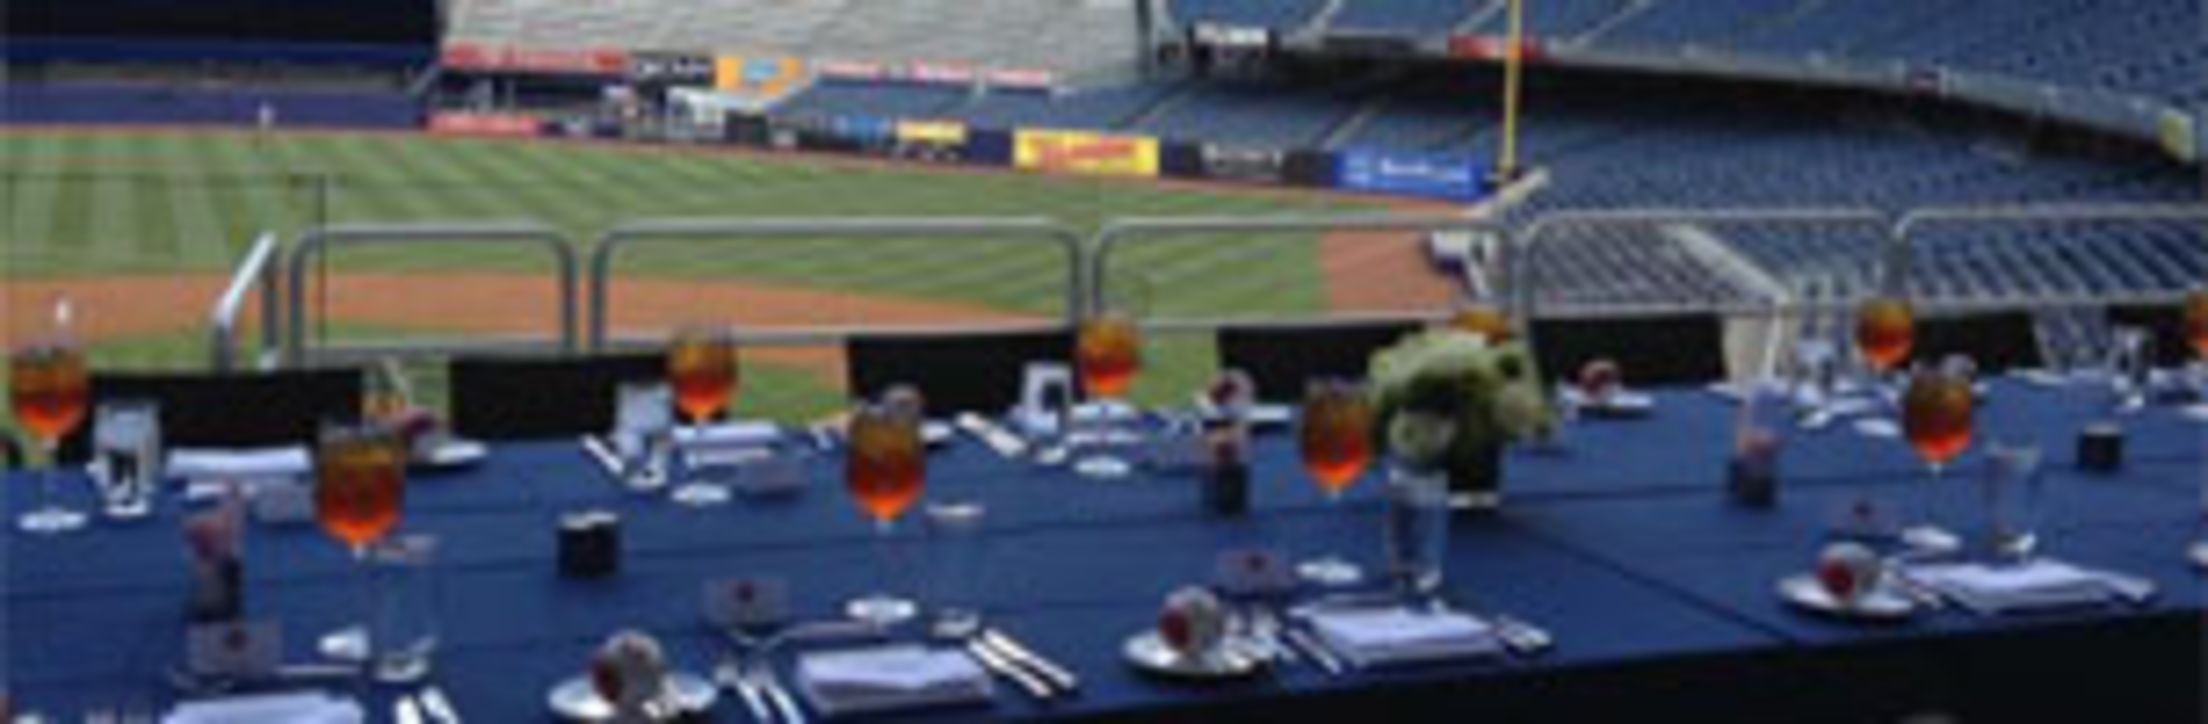 ACG NY PE Roundtable Dinner Series - Special Event at Yankees Stadium